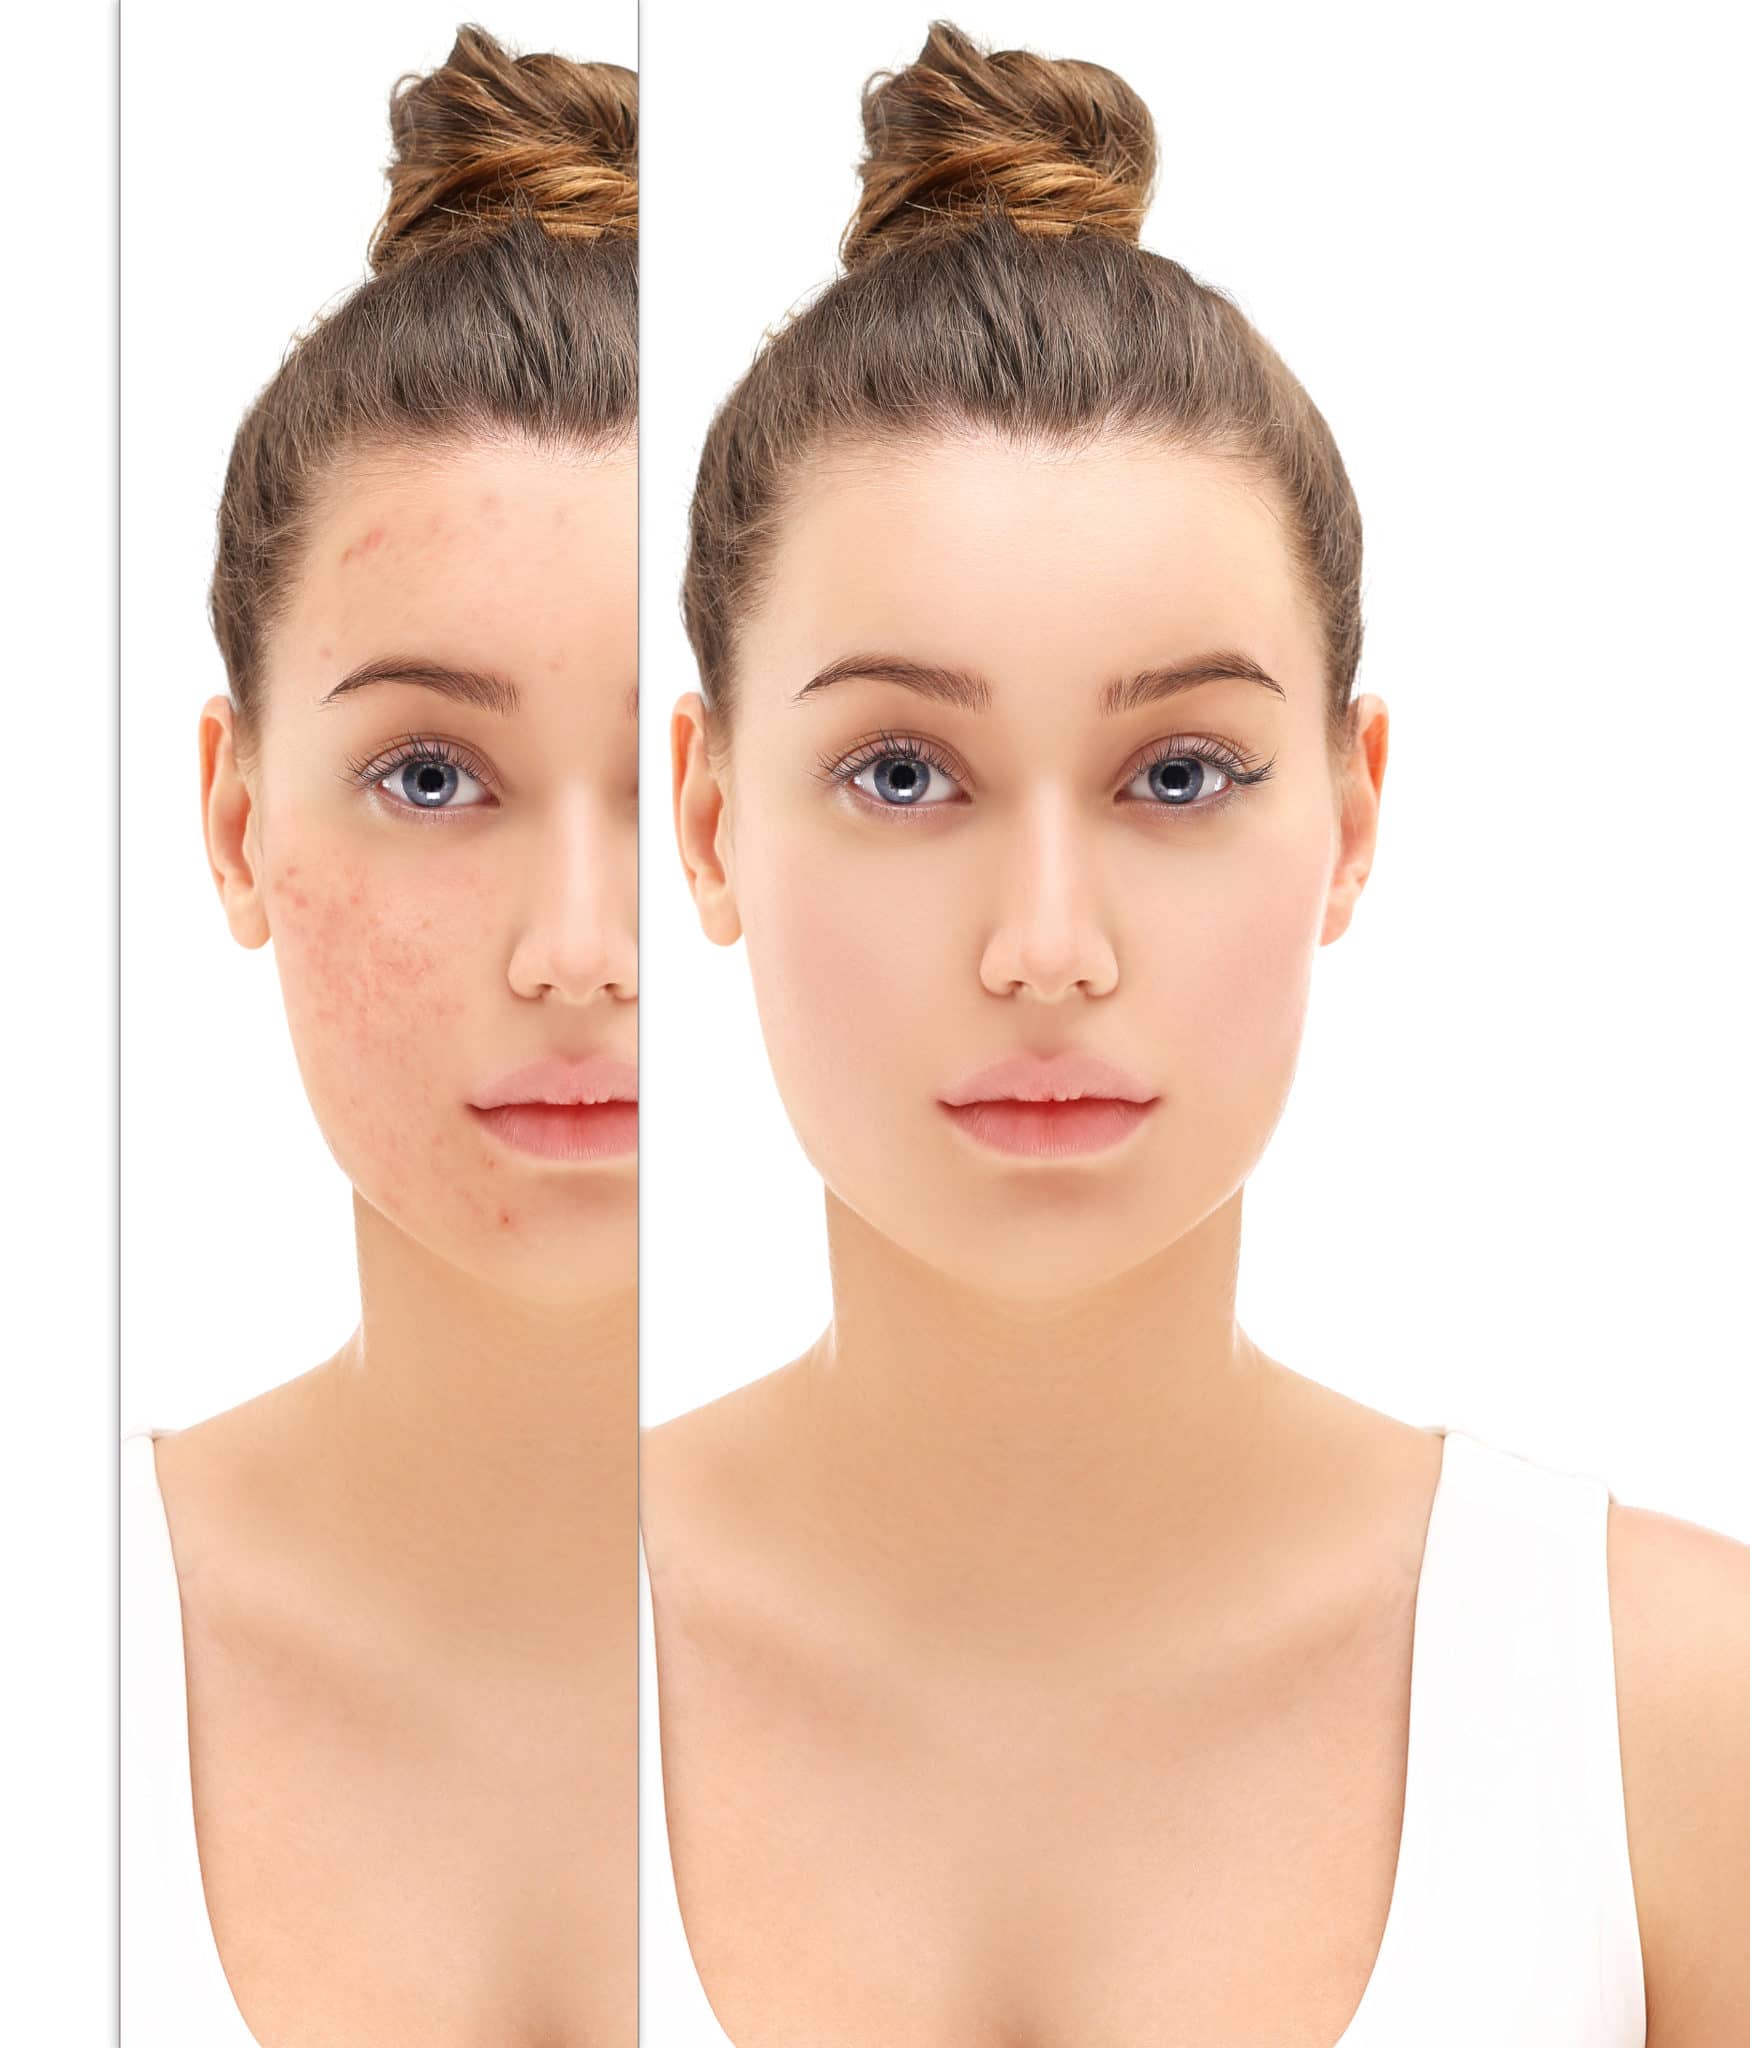 A before and after image set of a girl with acne and then her with clear skin